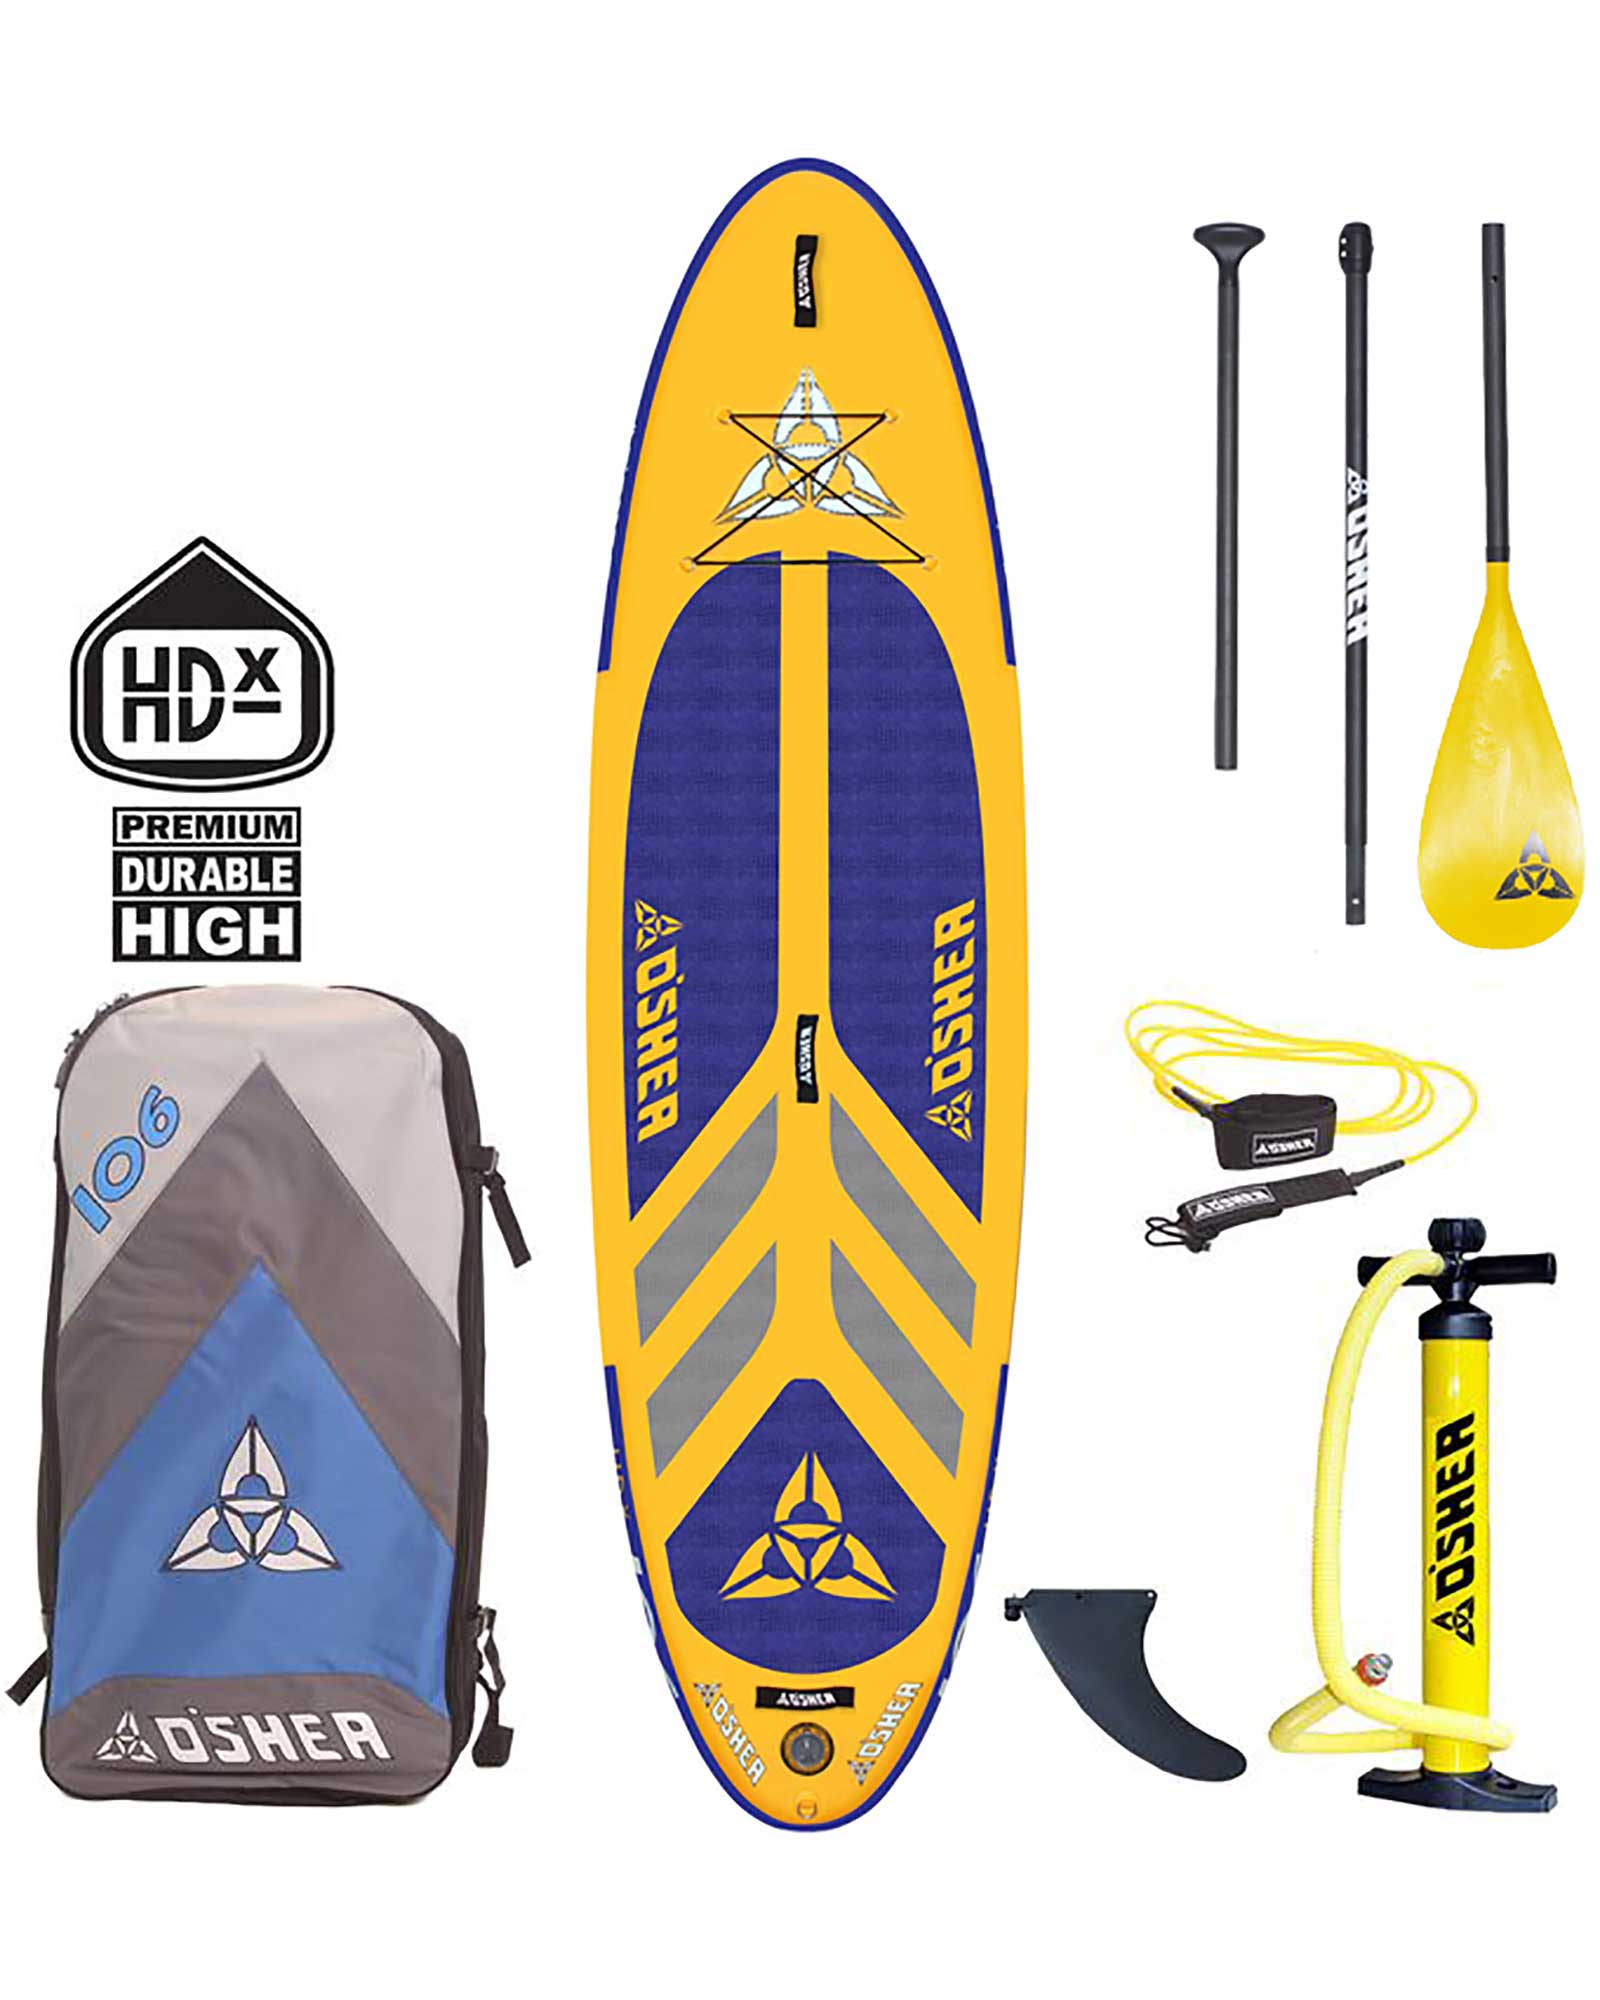 O'Shea HDx 10'6 Inflatable Stand-Up Paddleboard Package